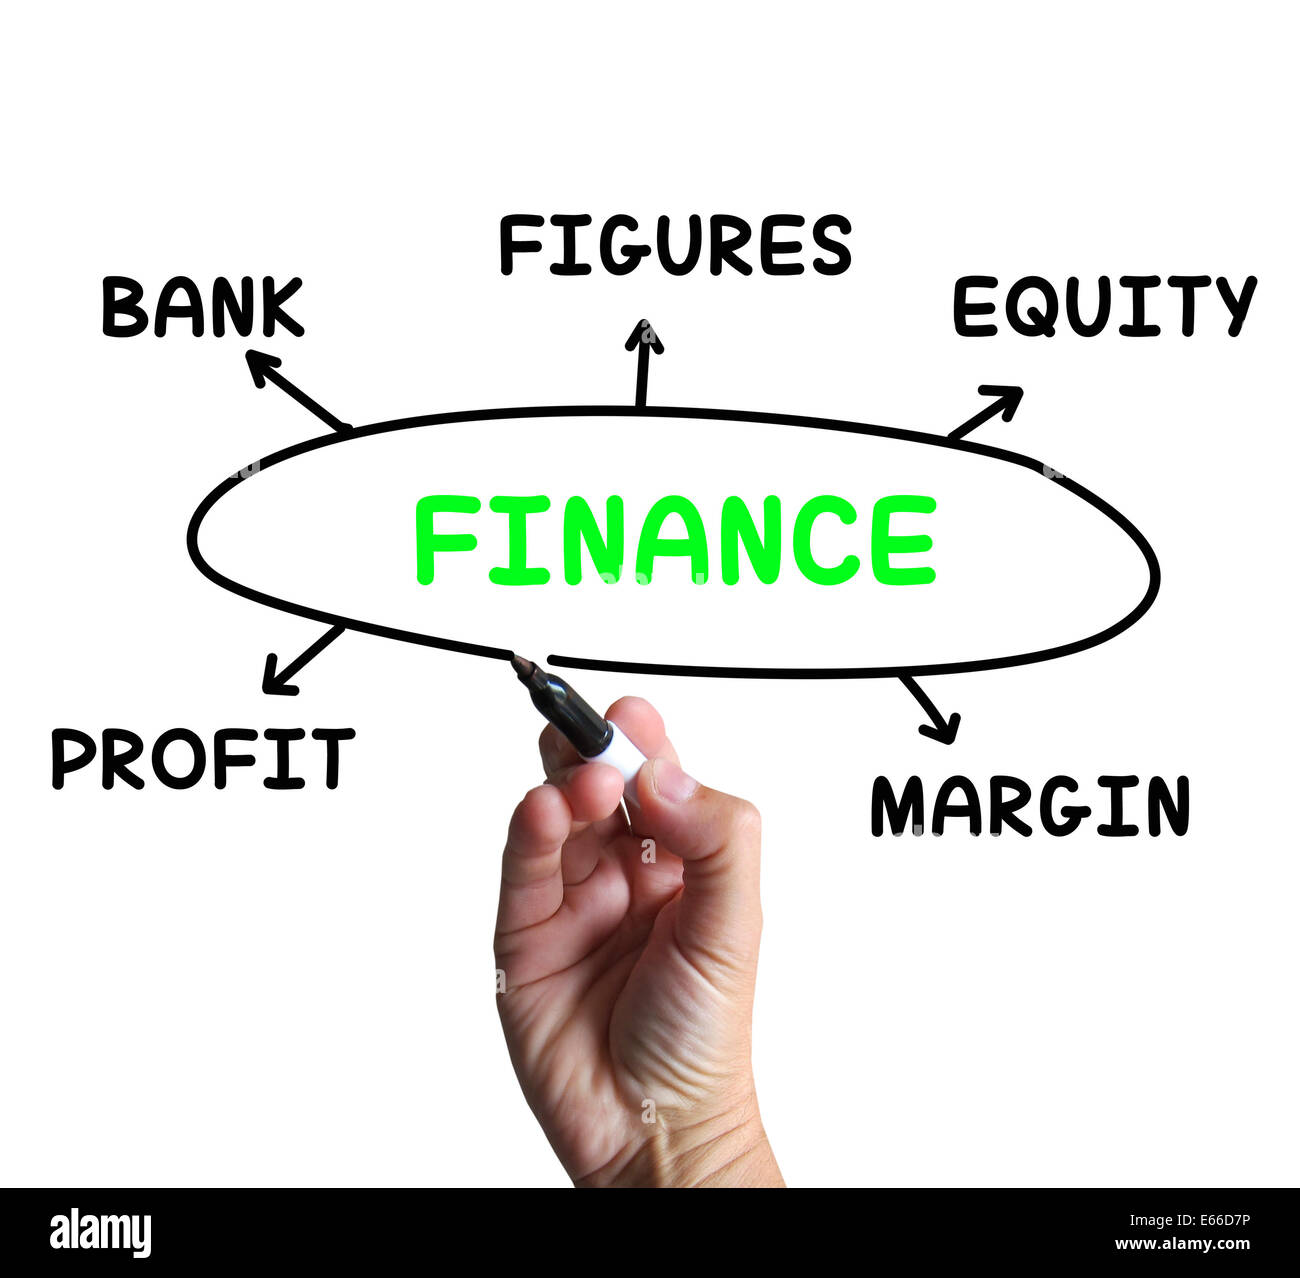 Finance Diagram Meaning Figures Equity And Profit Stock Photo